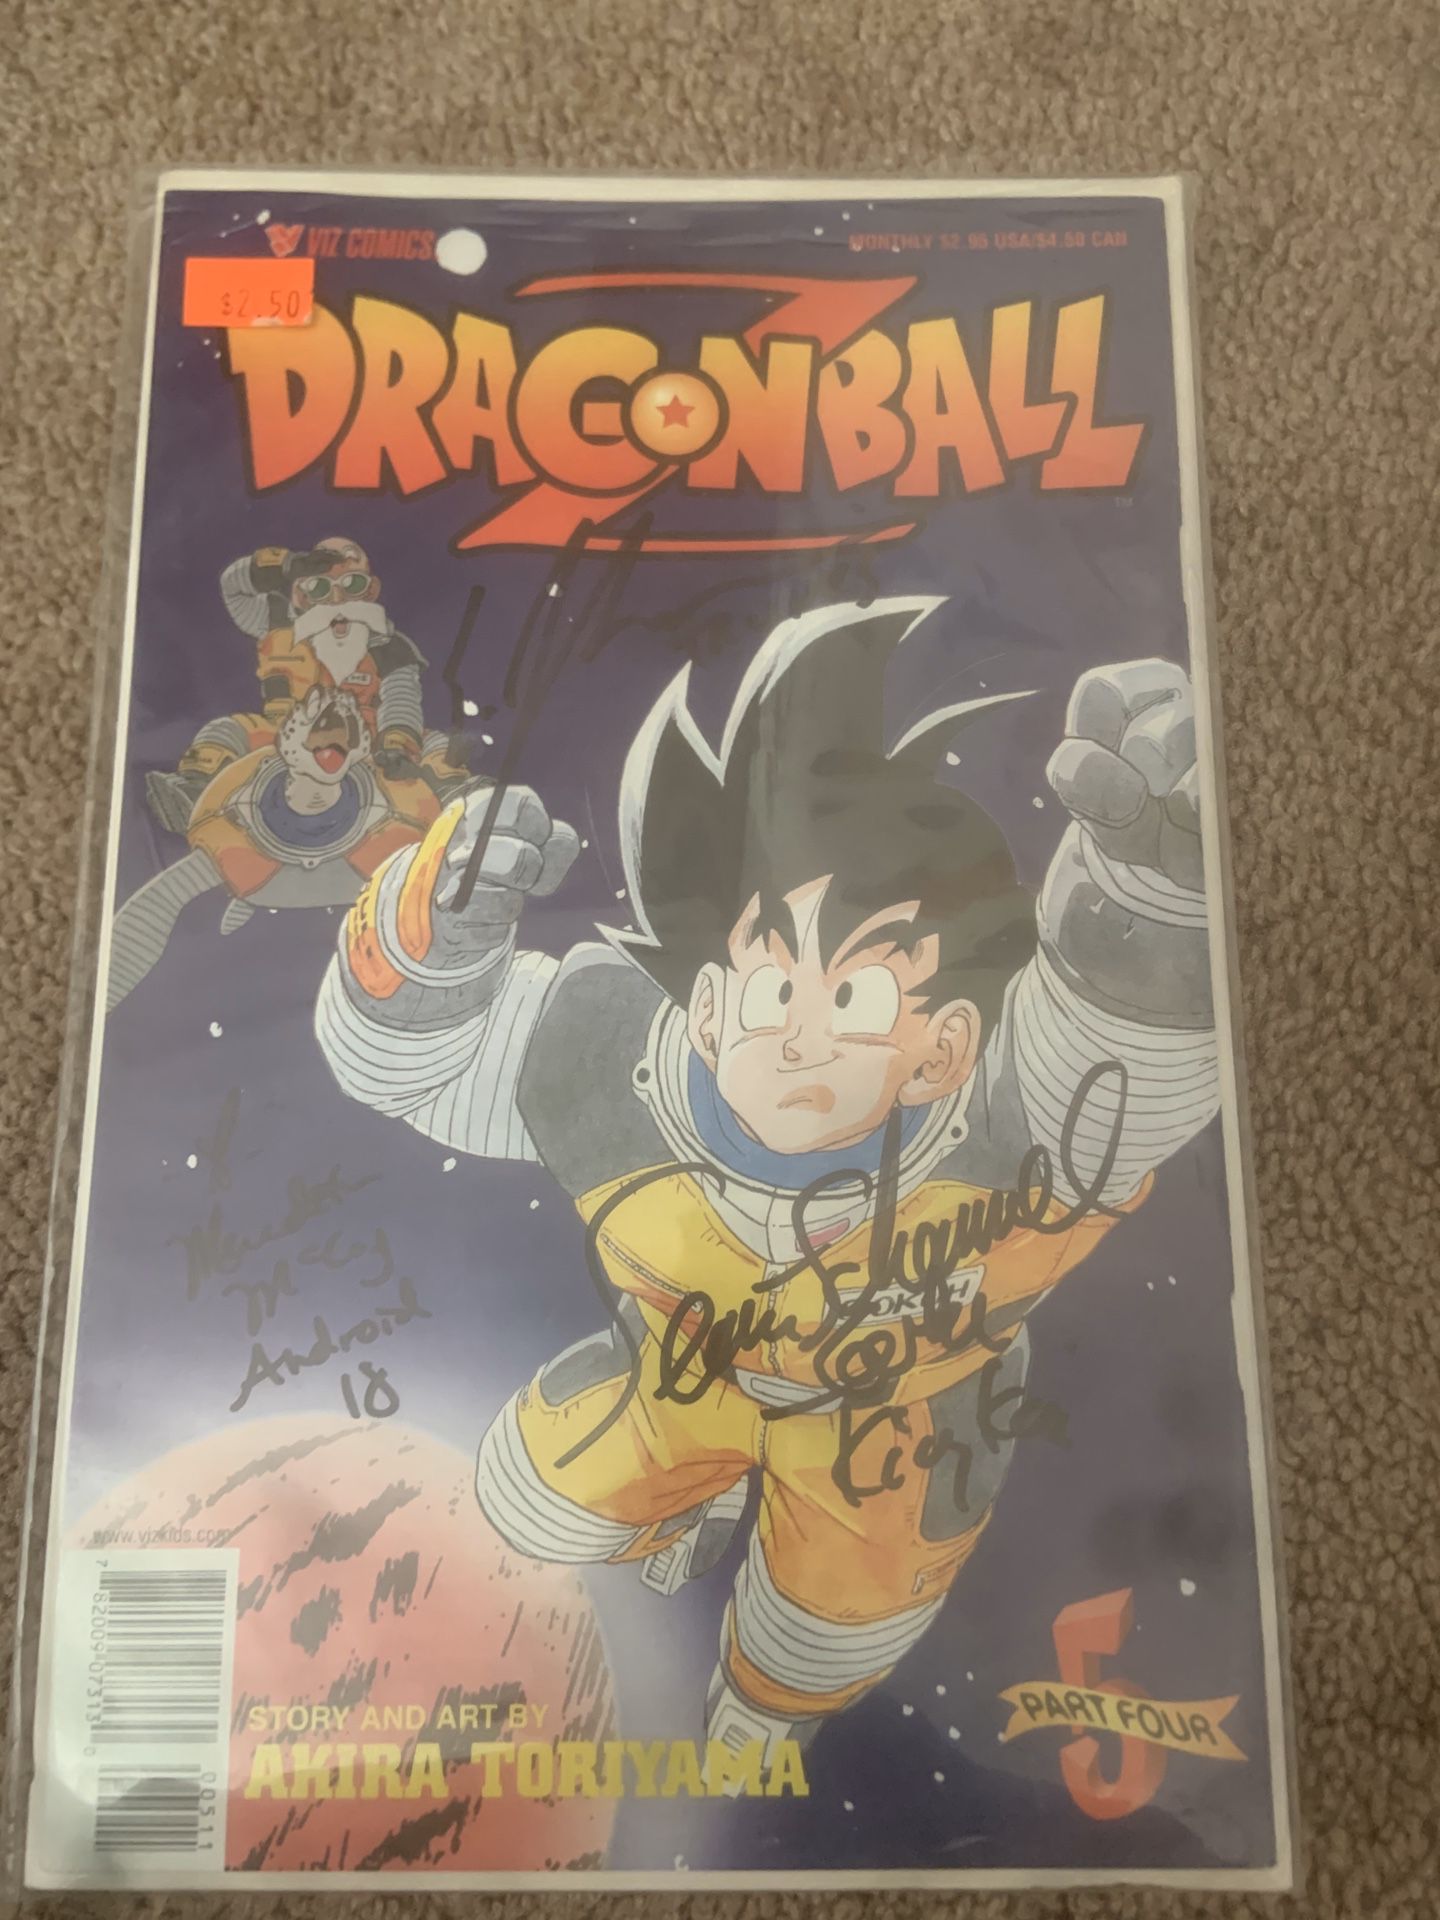 Dragon ball Z comic signed by trunks king kai andriod 18